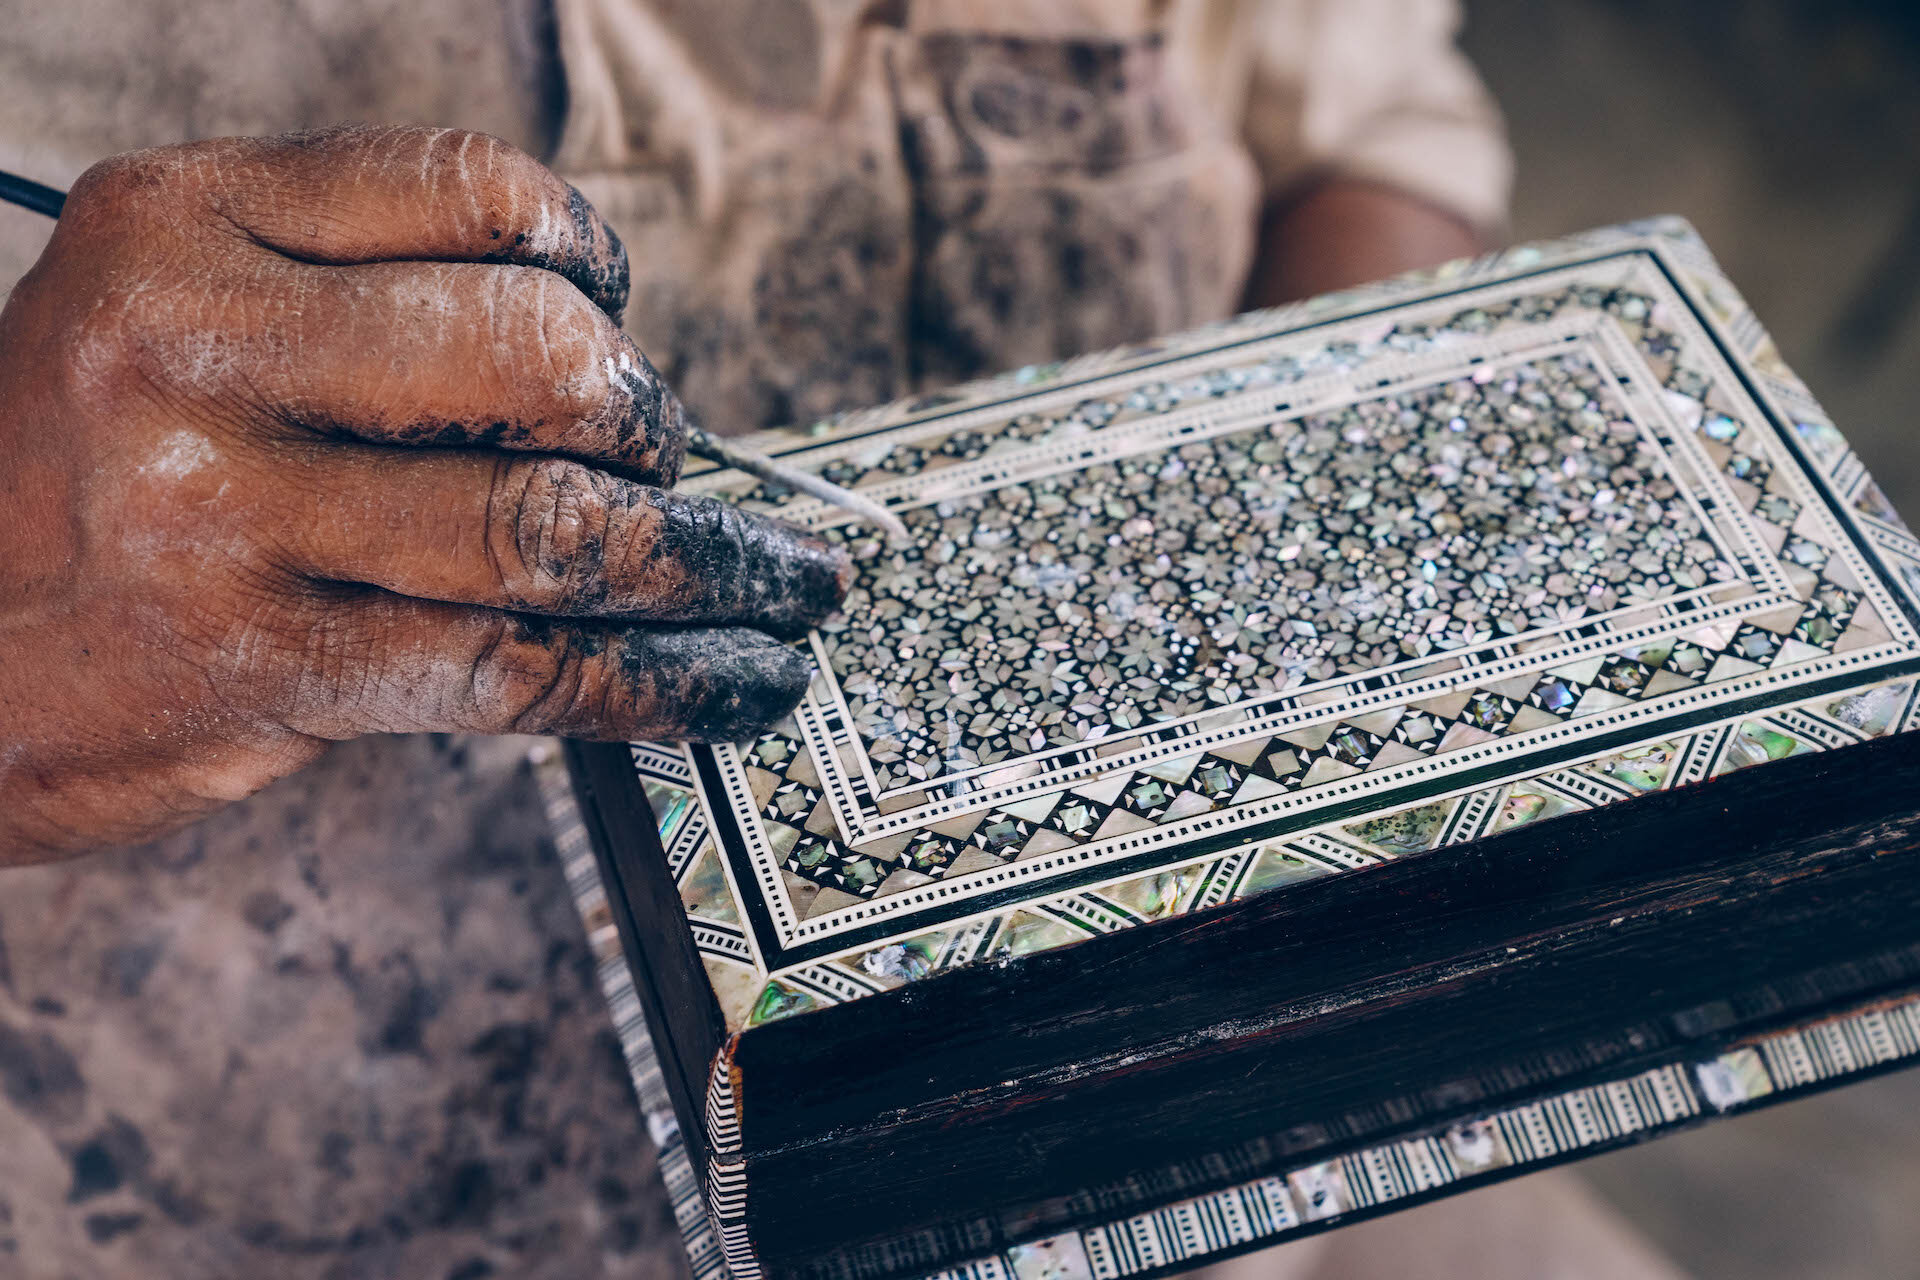 An artisan applying the finishing touches to a box inplaid with mother-of-pearl